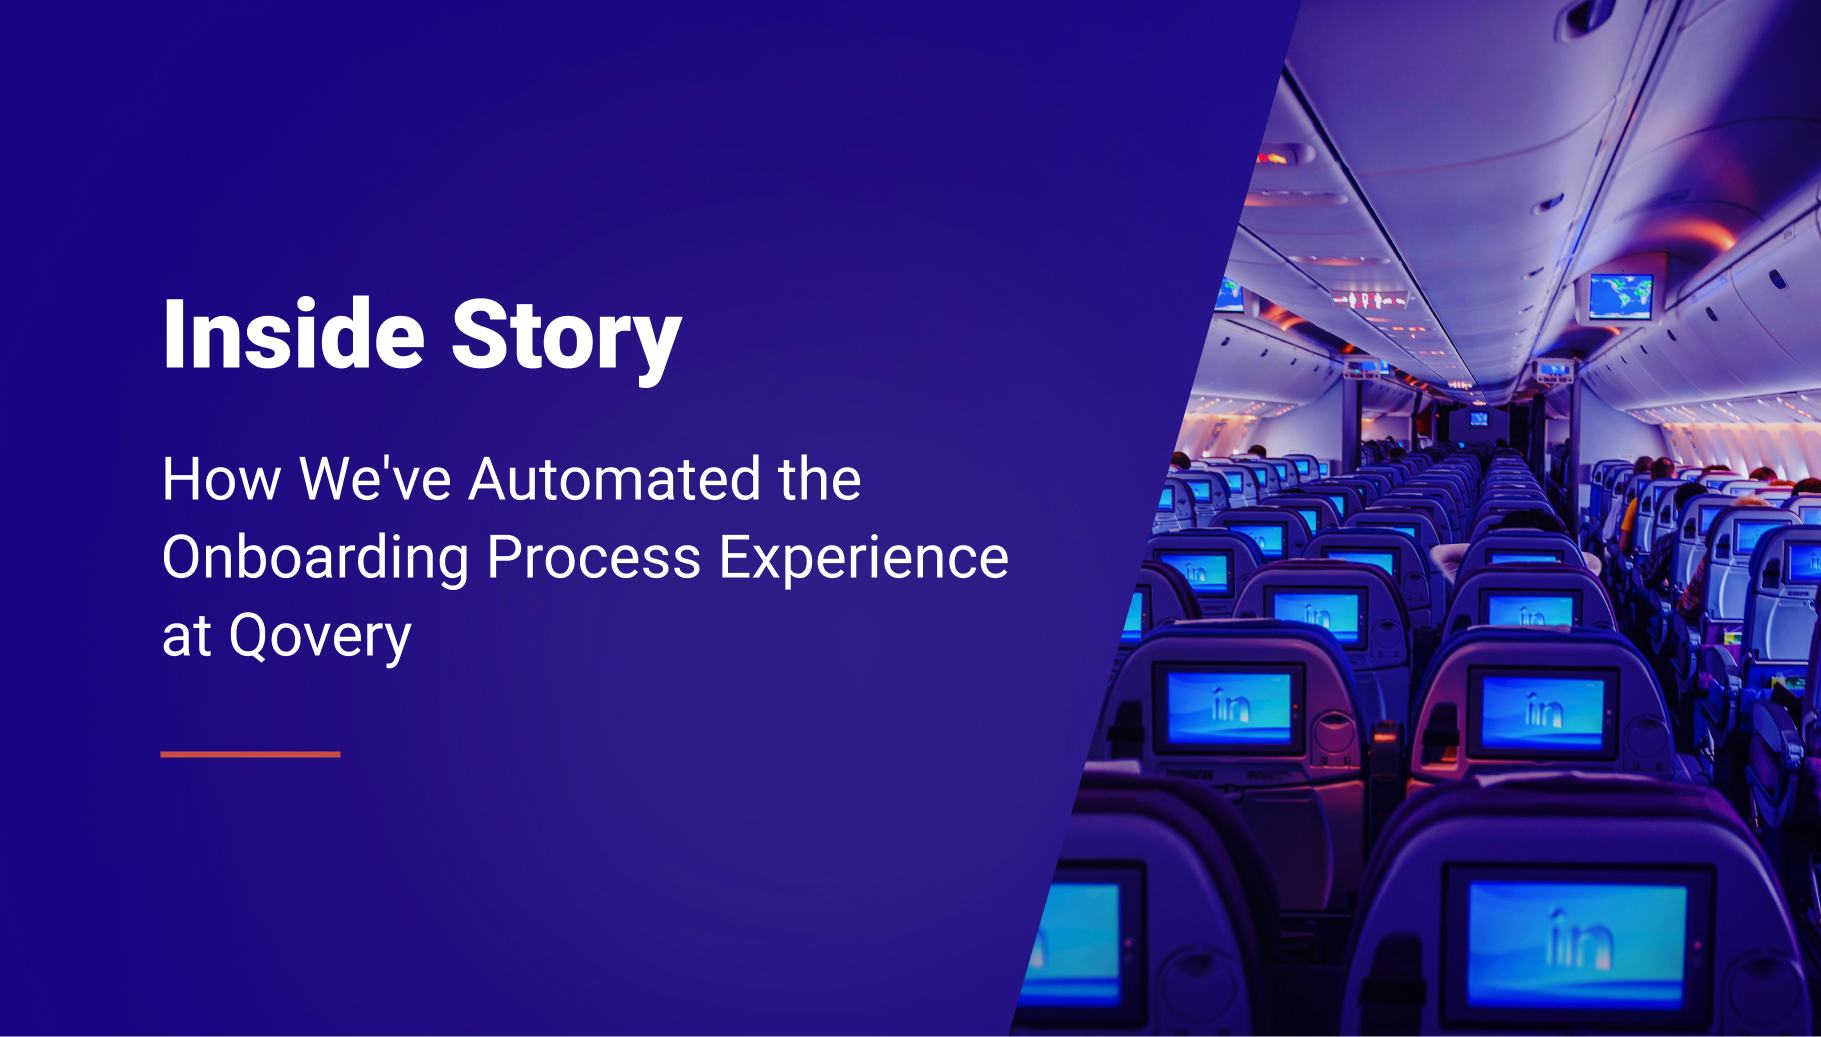 Inside Story: How We've Automated the Onboarding Process Experience at Qovery - Qovery